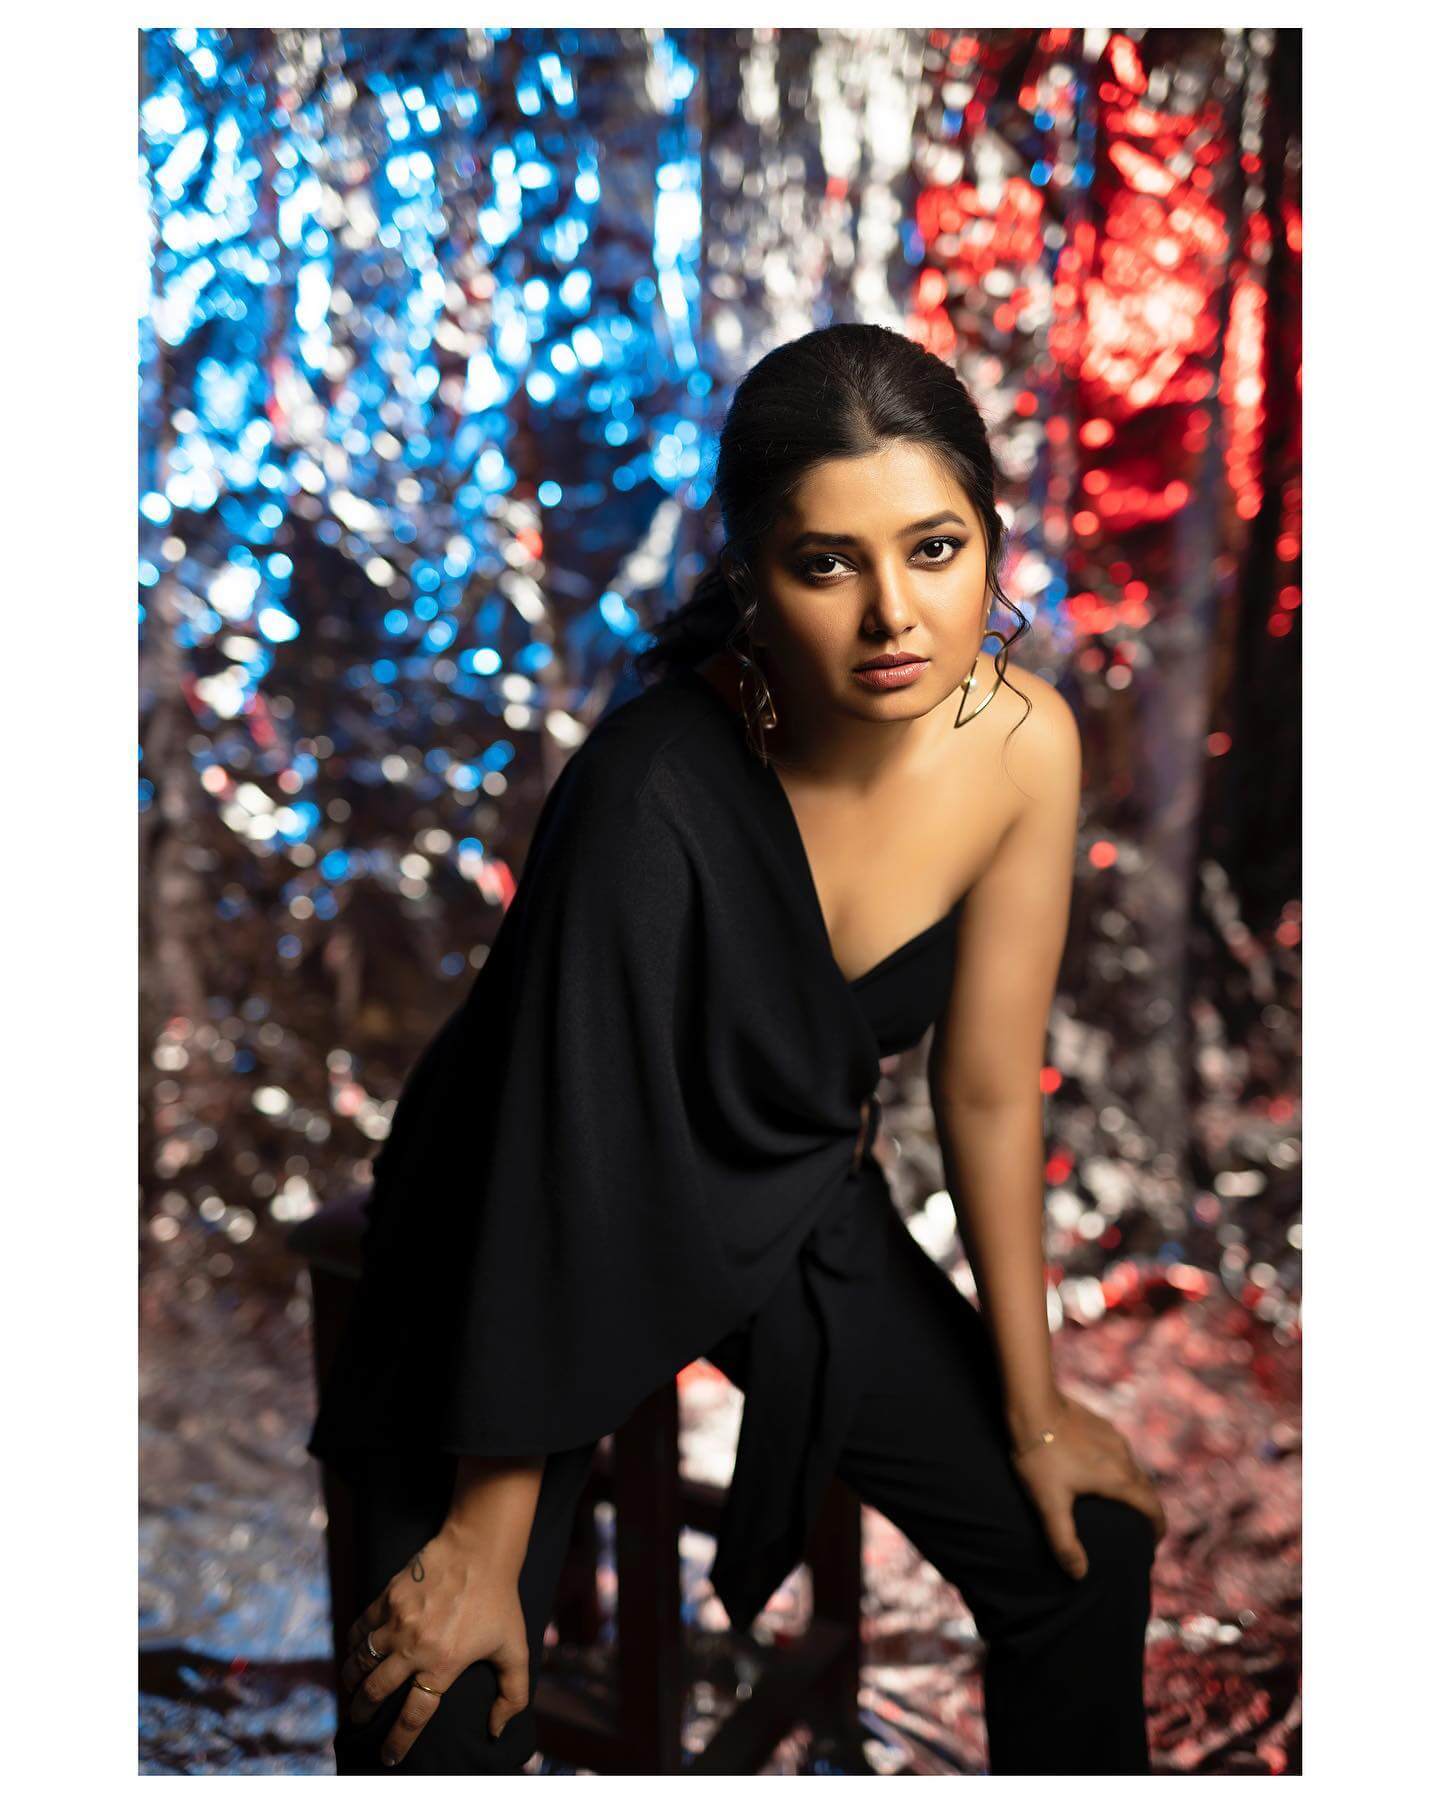 Actress Prajaktta Mali in sexy black outfit